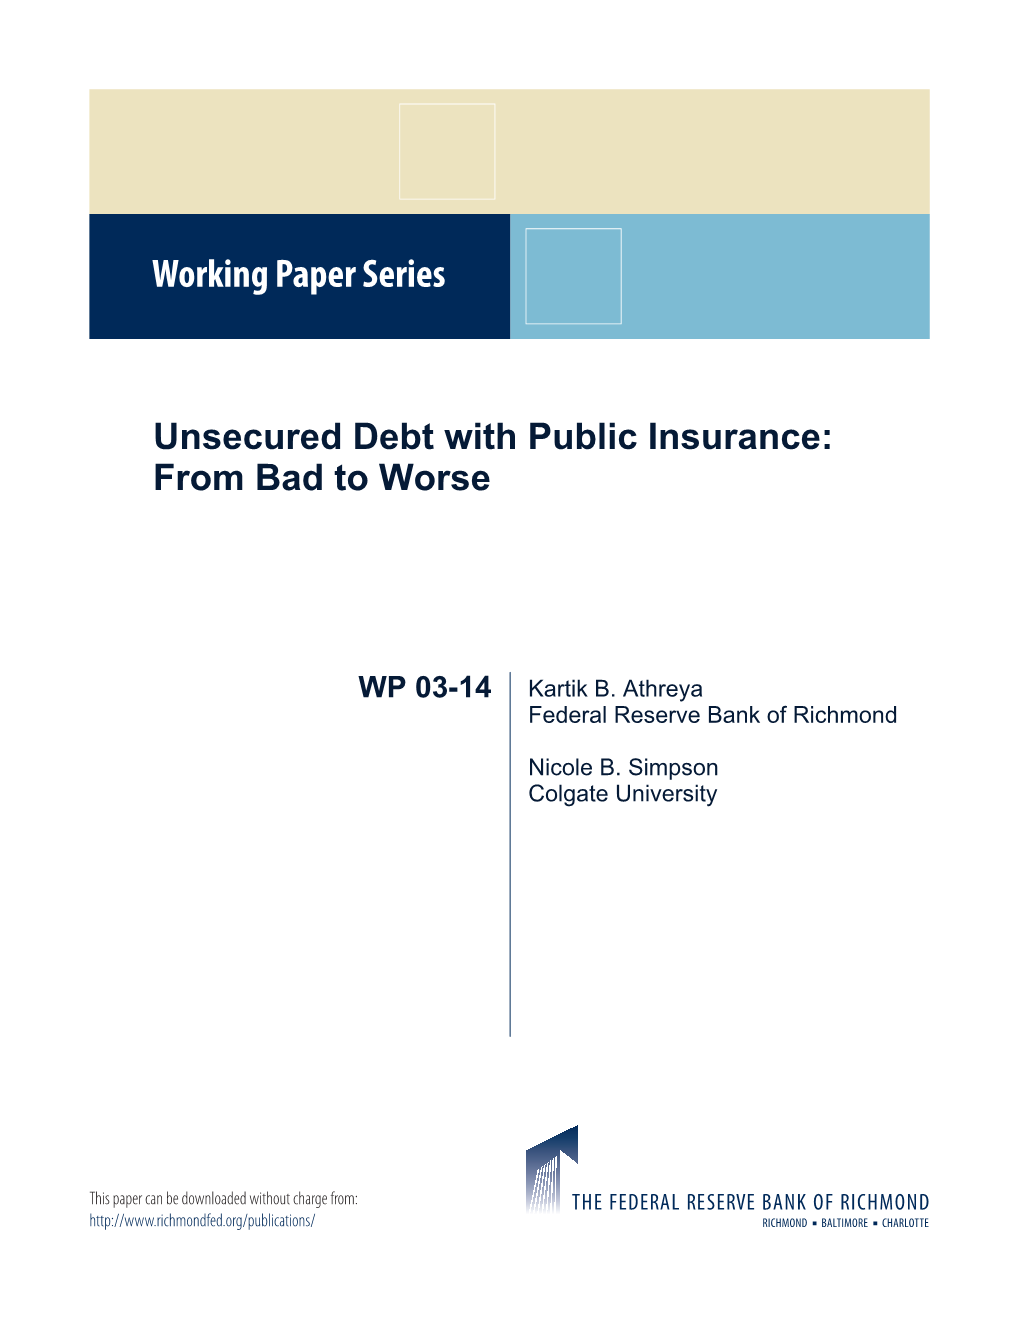 Unsecured Debt with Public Insurance: From